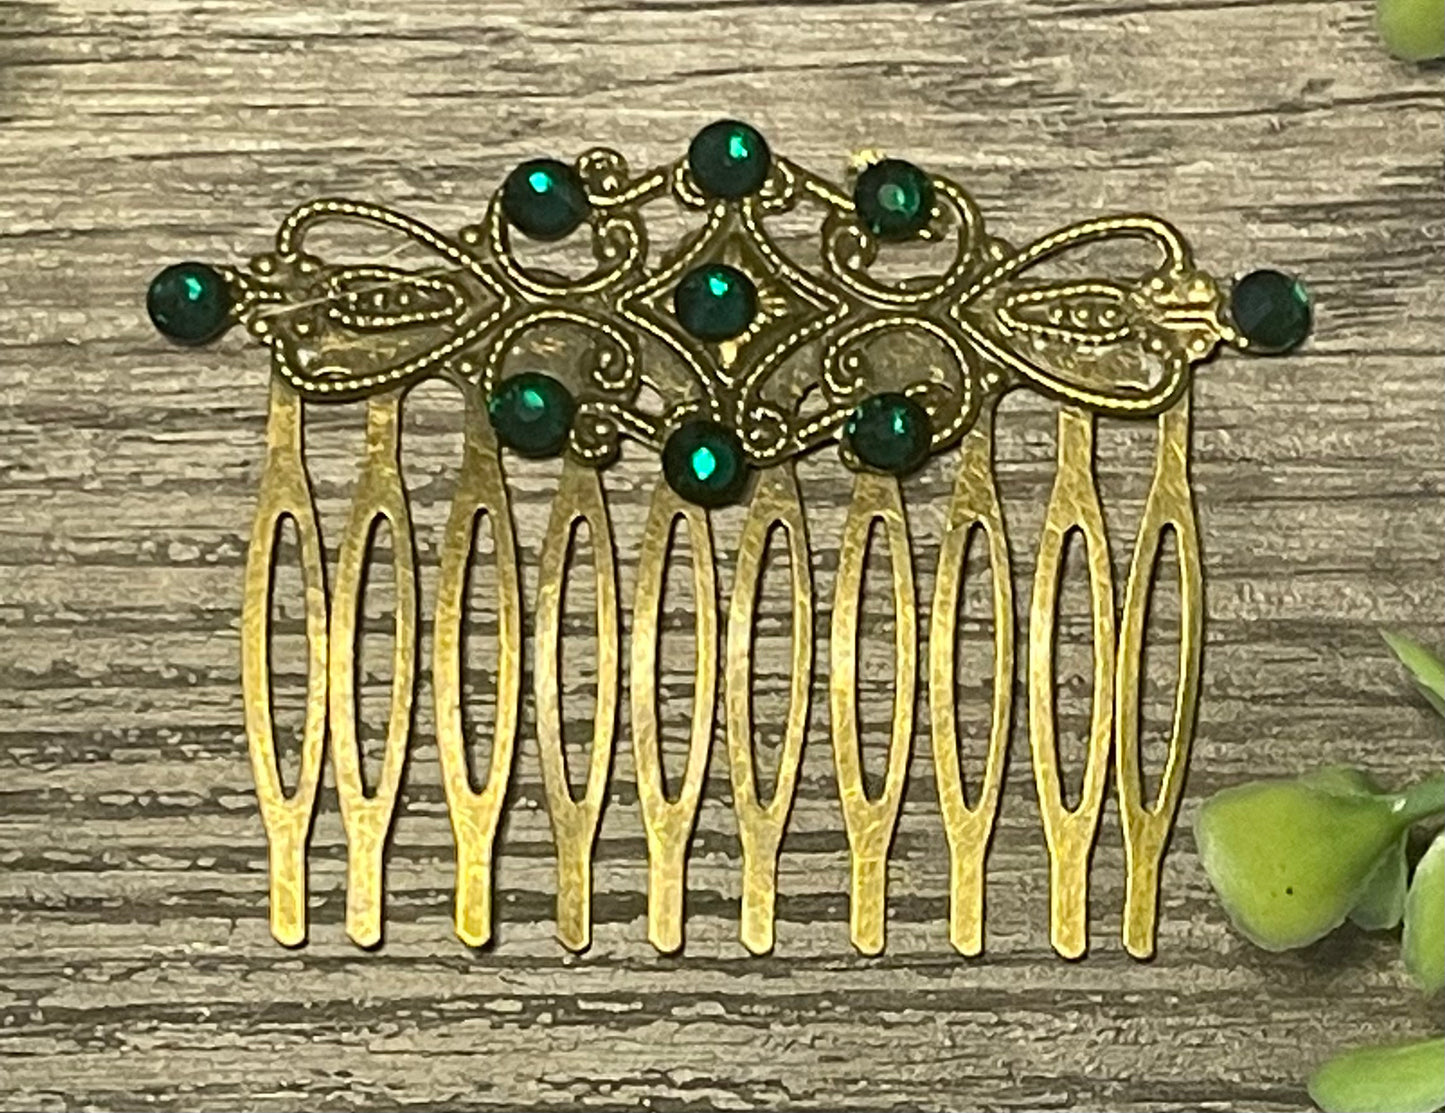 Emerald green Vintage Style Crystal Rhinestone 2.5” antique tone Metal side Comb bridal accessories handmade by hairdazzzel wedding accessory